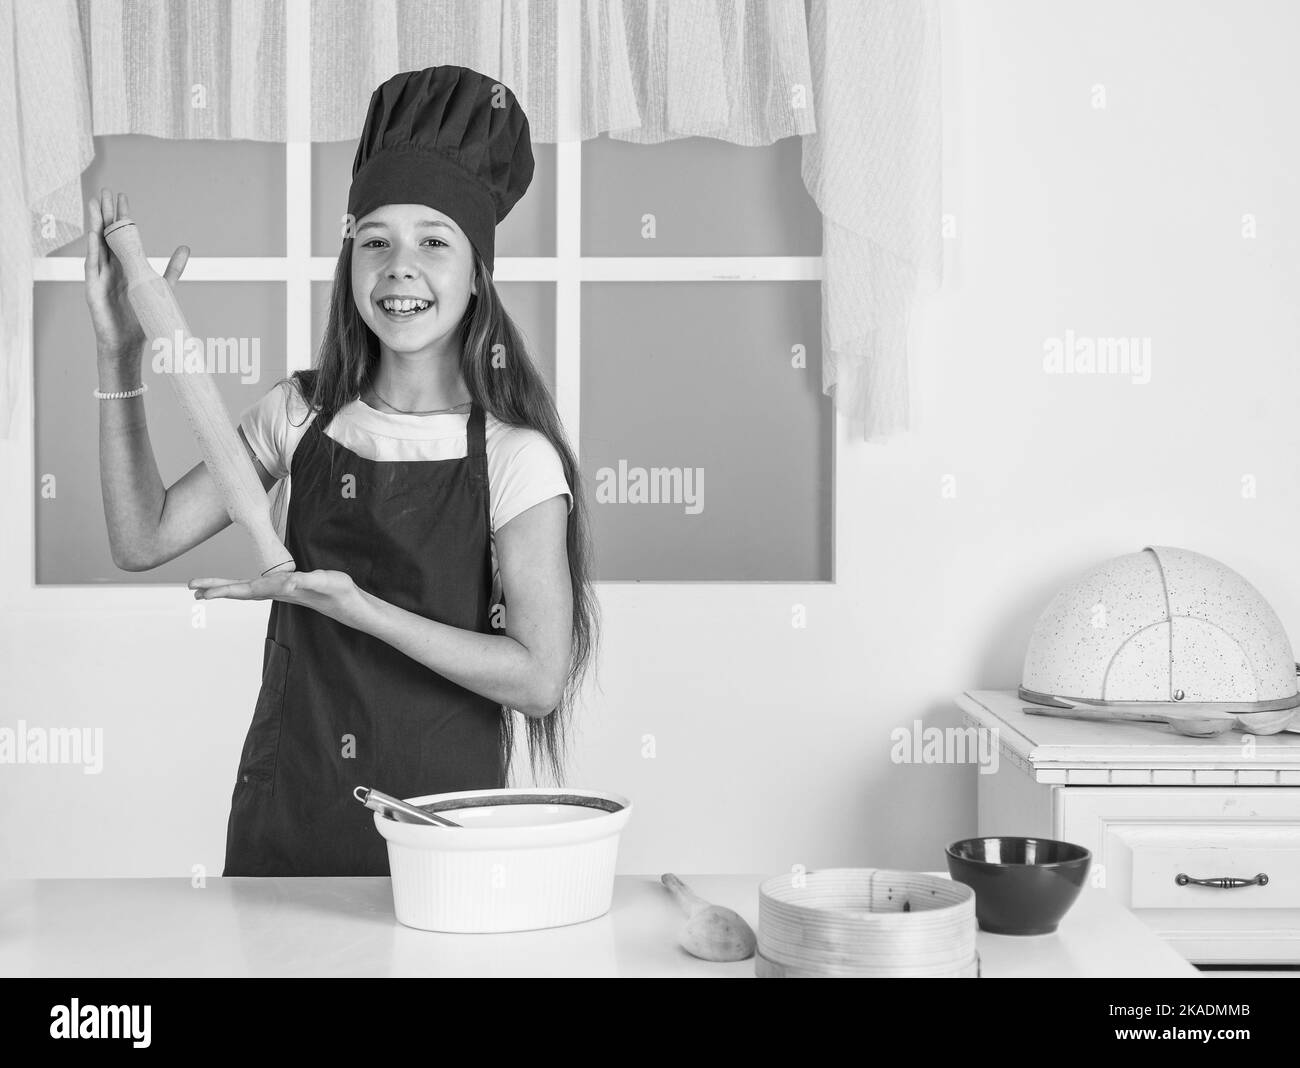 Being hungry. child study how to cook by recipe. kid cooking in kitchen. choosing future career Stock Photo